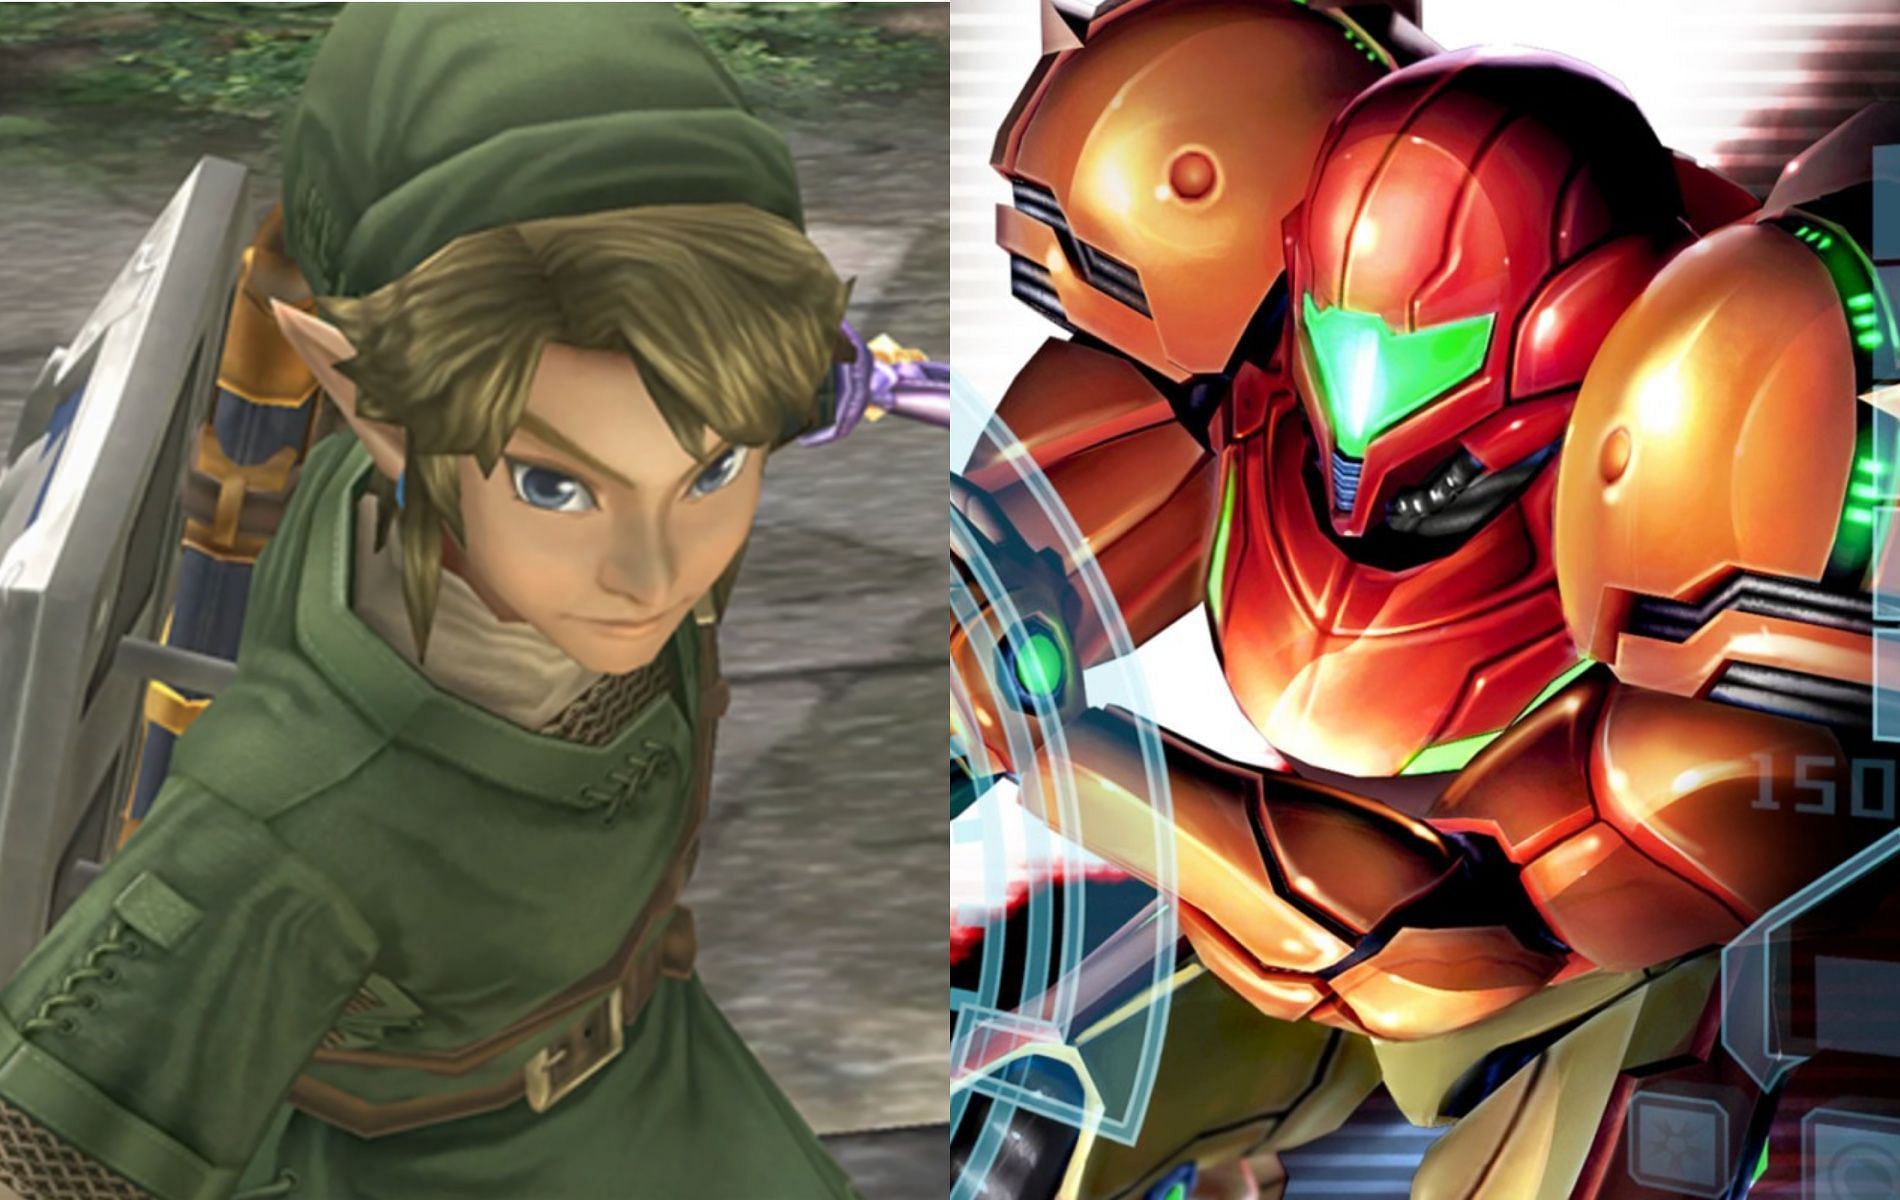 Zelda: Twilight Princess and Wind Waker Switch Ports to Release This Year  Alongside Metroid Prime Remastered, Grubb Believes, zelda wind waker rom pt  br